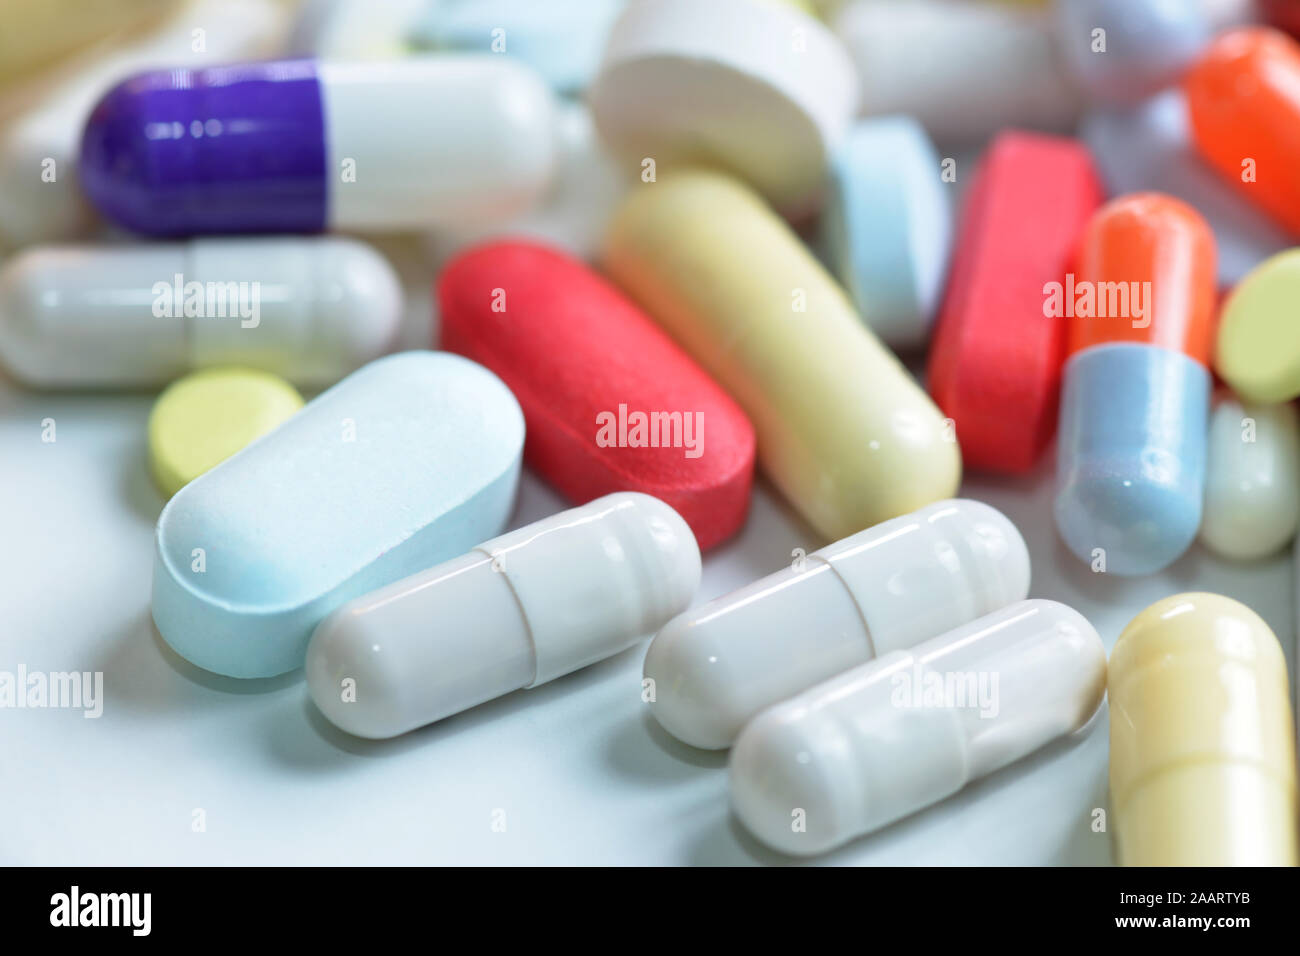 Colorful tablets and assorted capsules spill on neutral background. Stock Photo